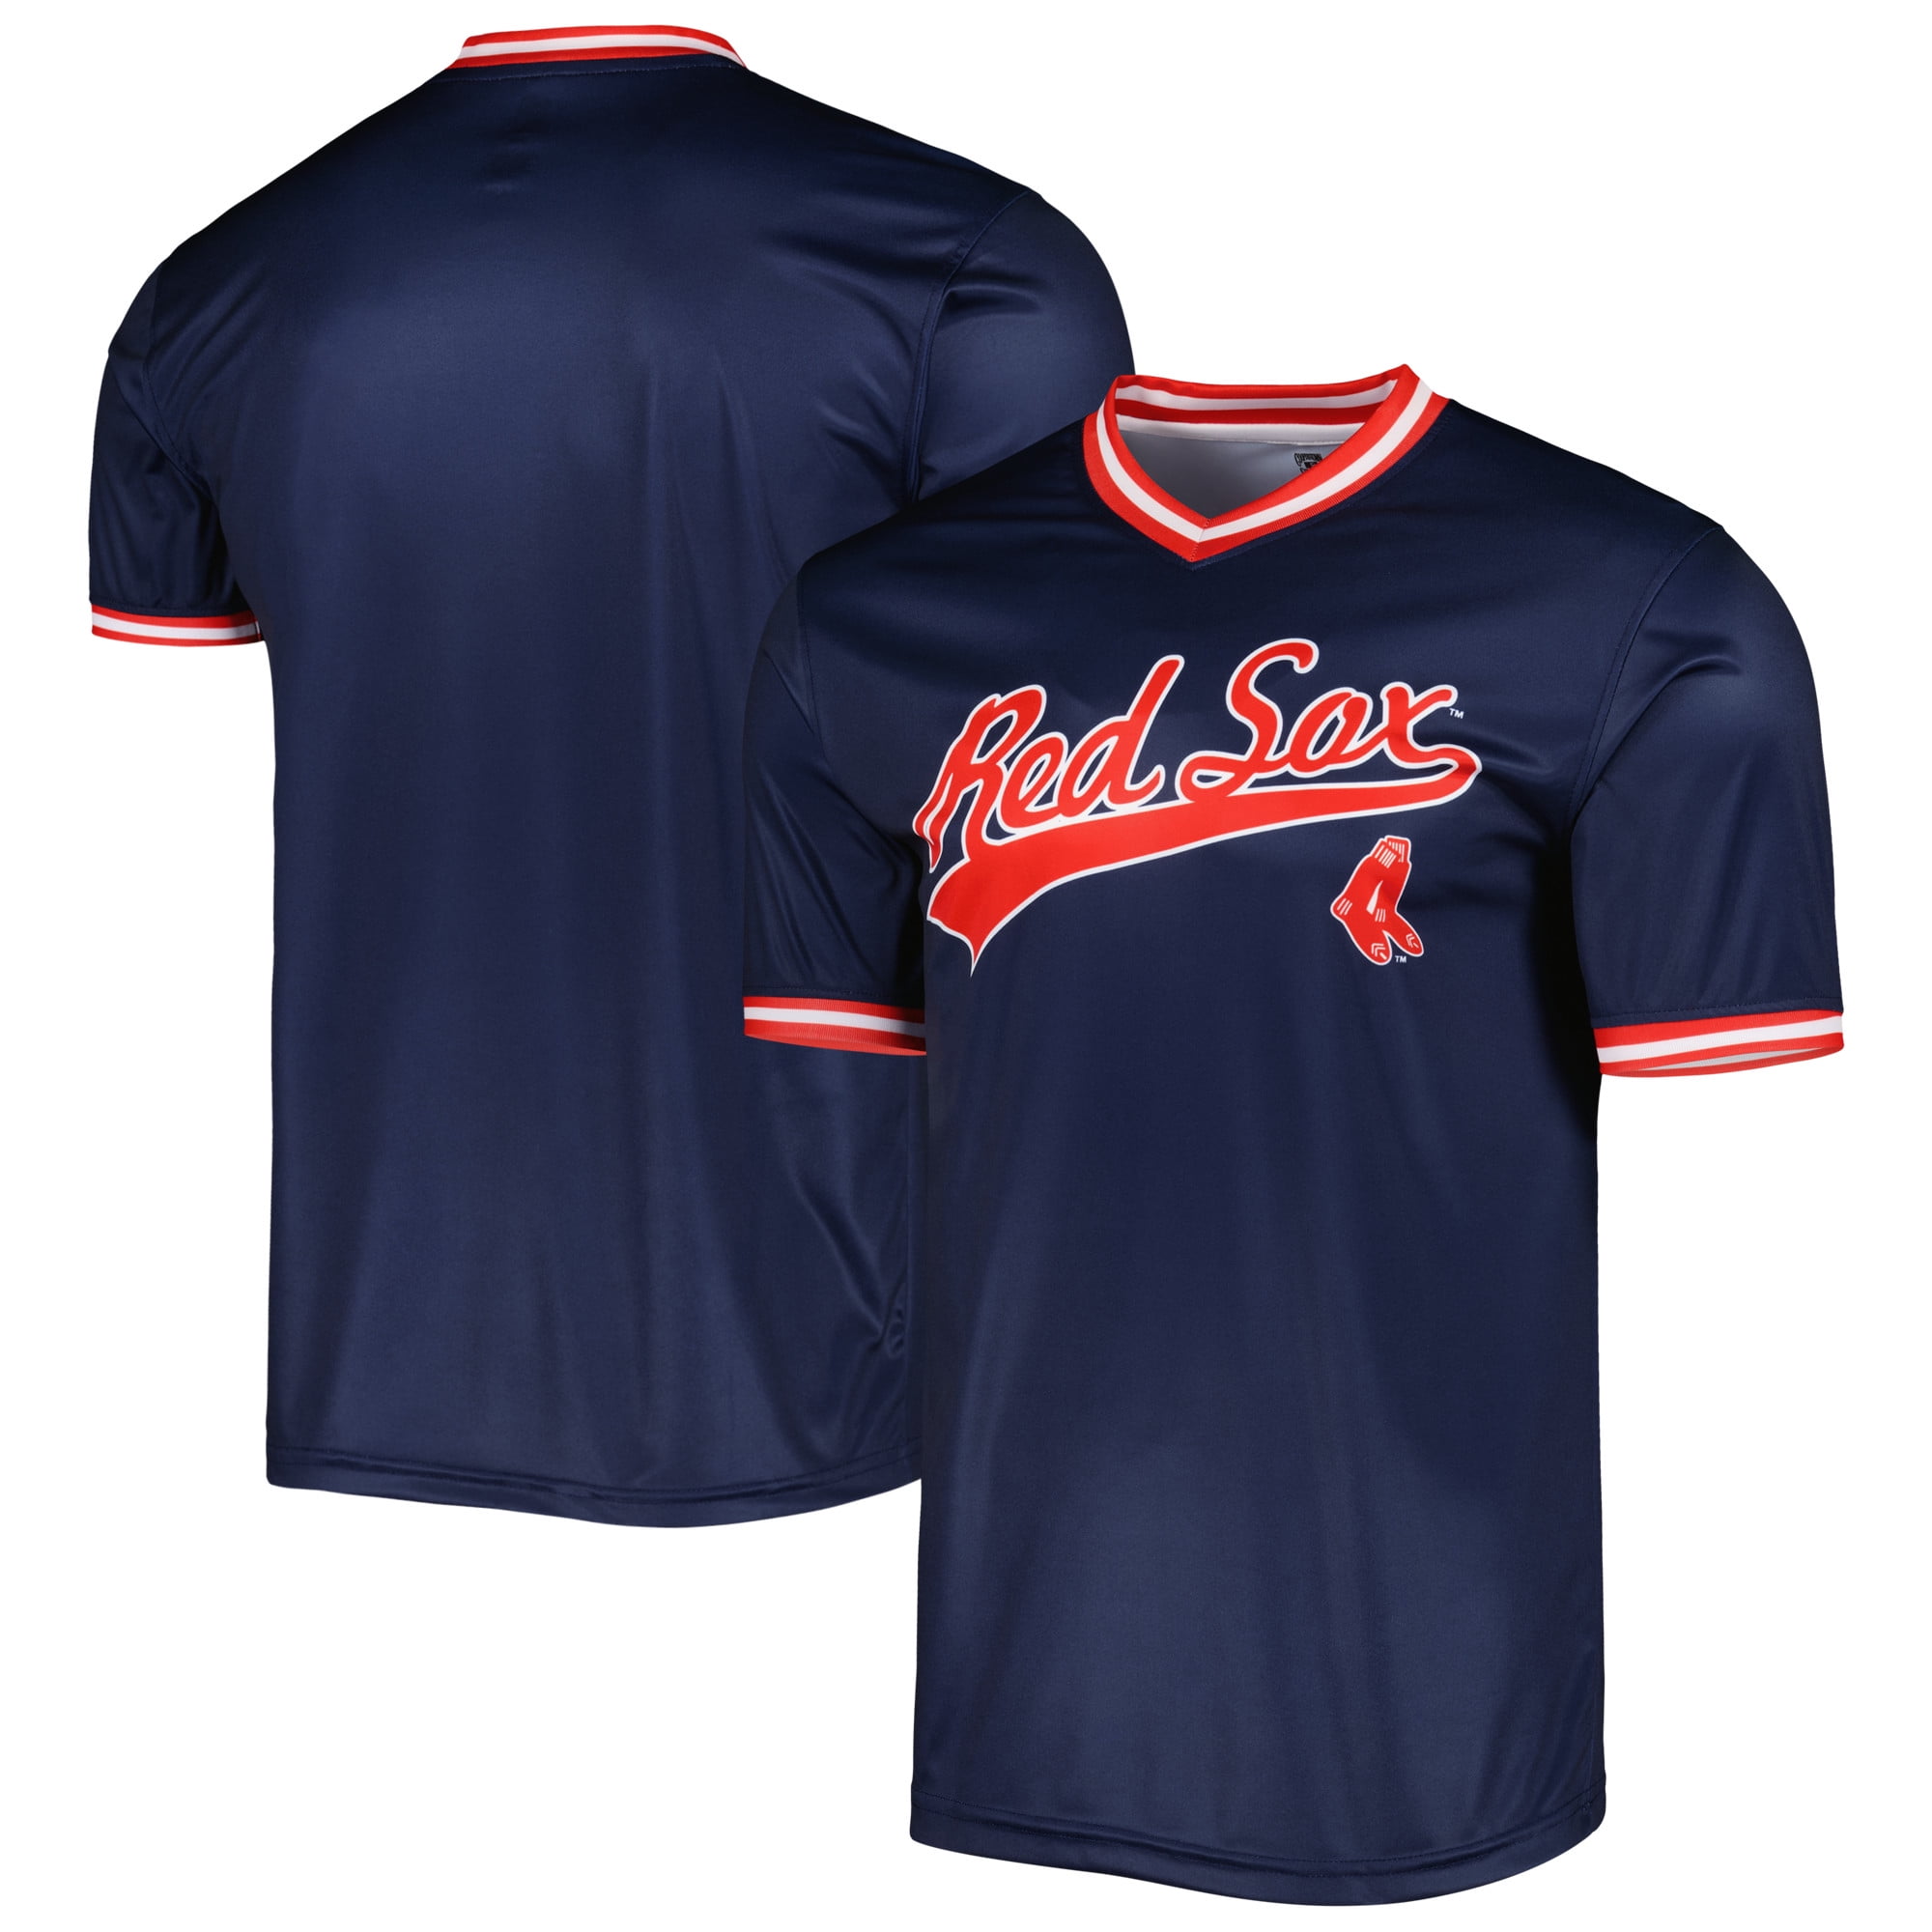 red sox patriots day jersey for sale